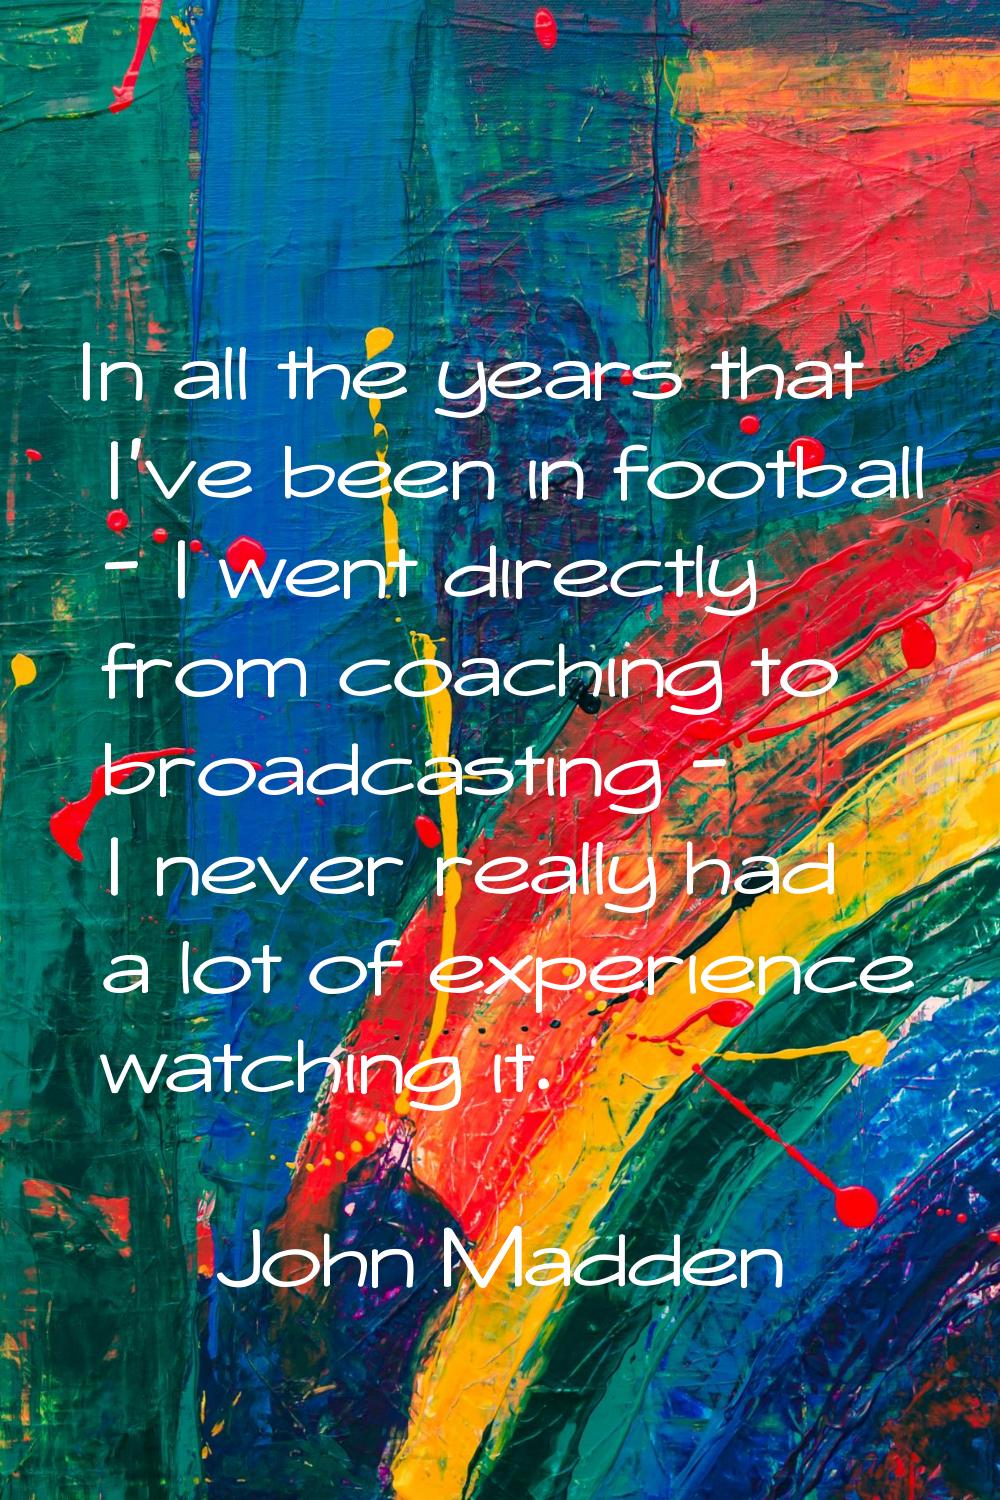 In all the years that I've been in football - I went directly from coaching to broadcasting - I nev